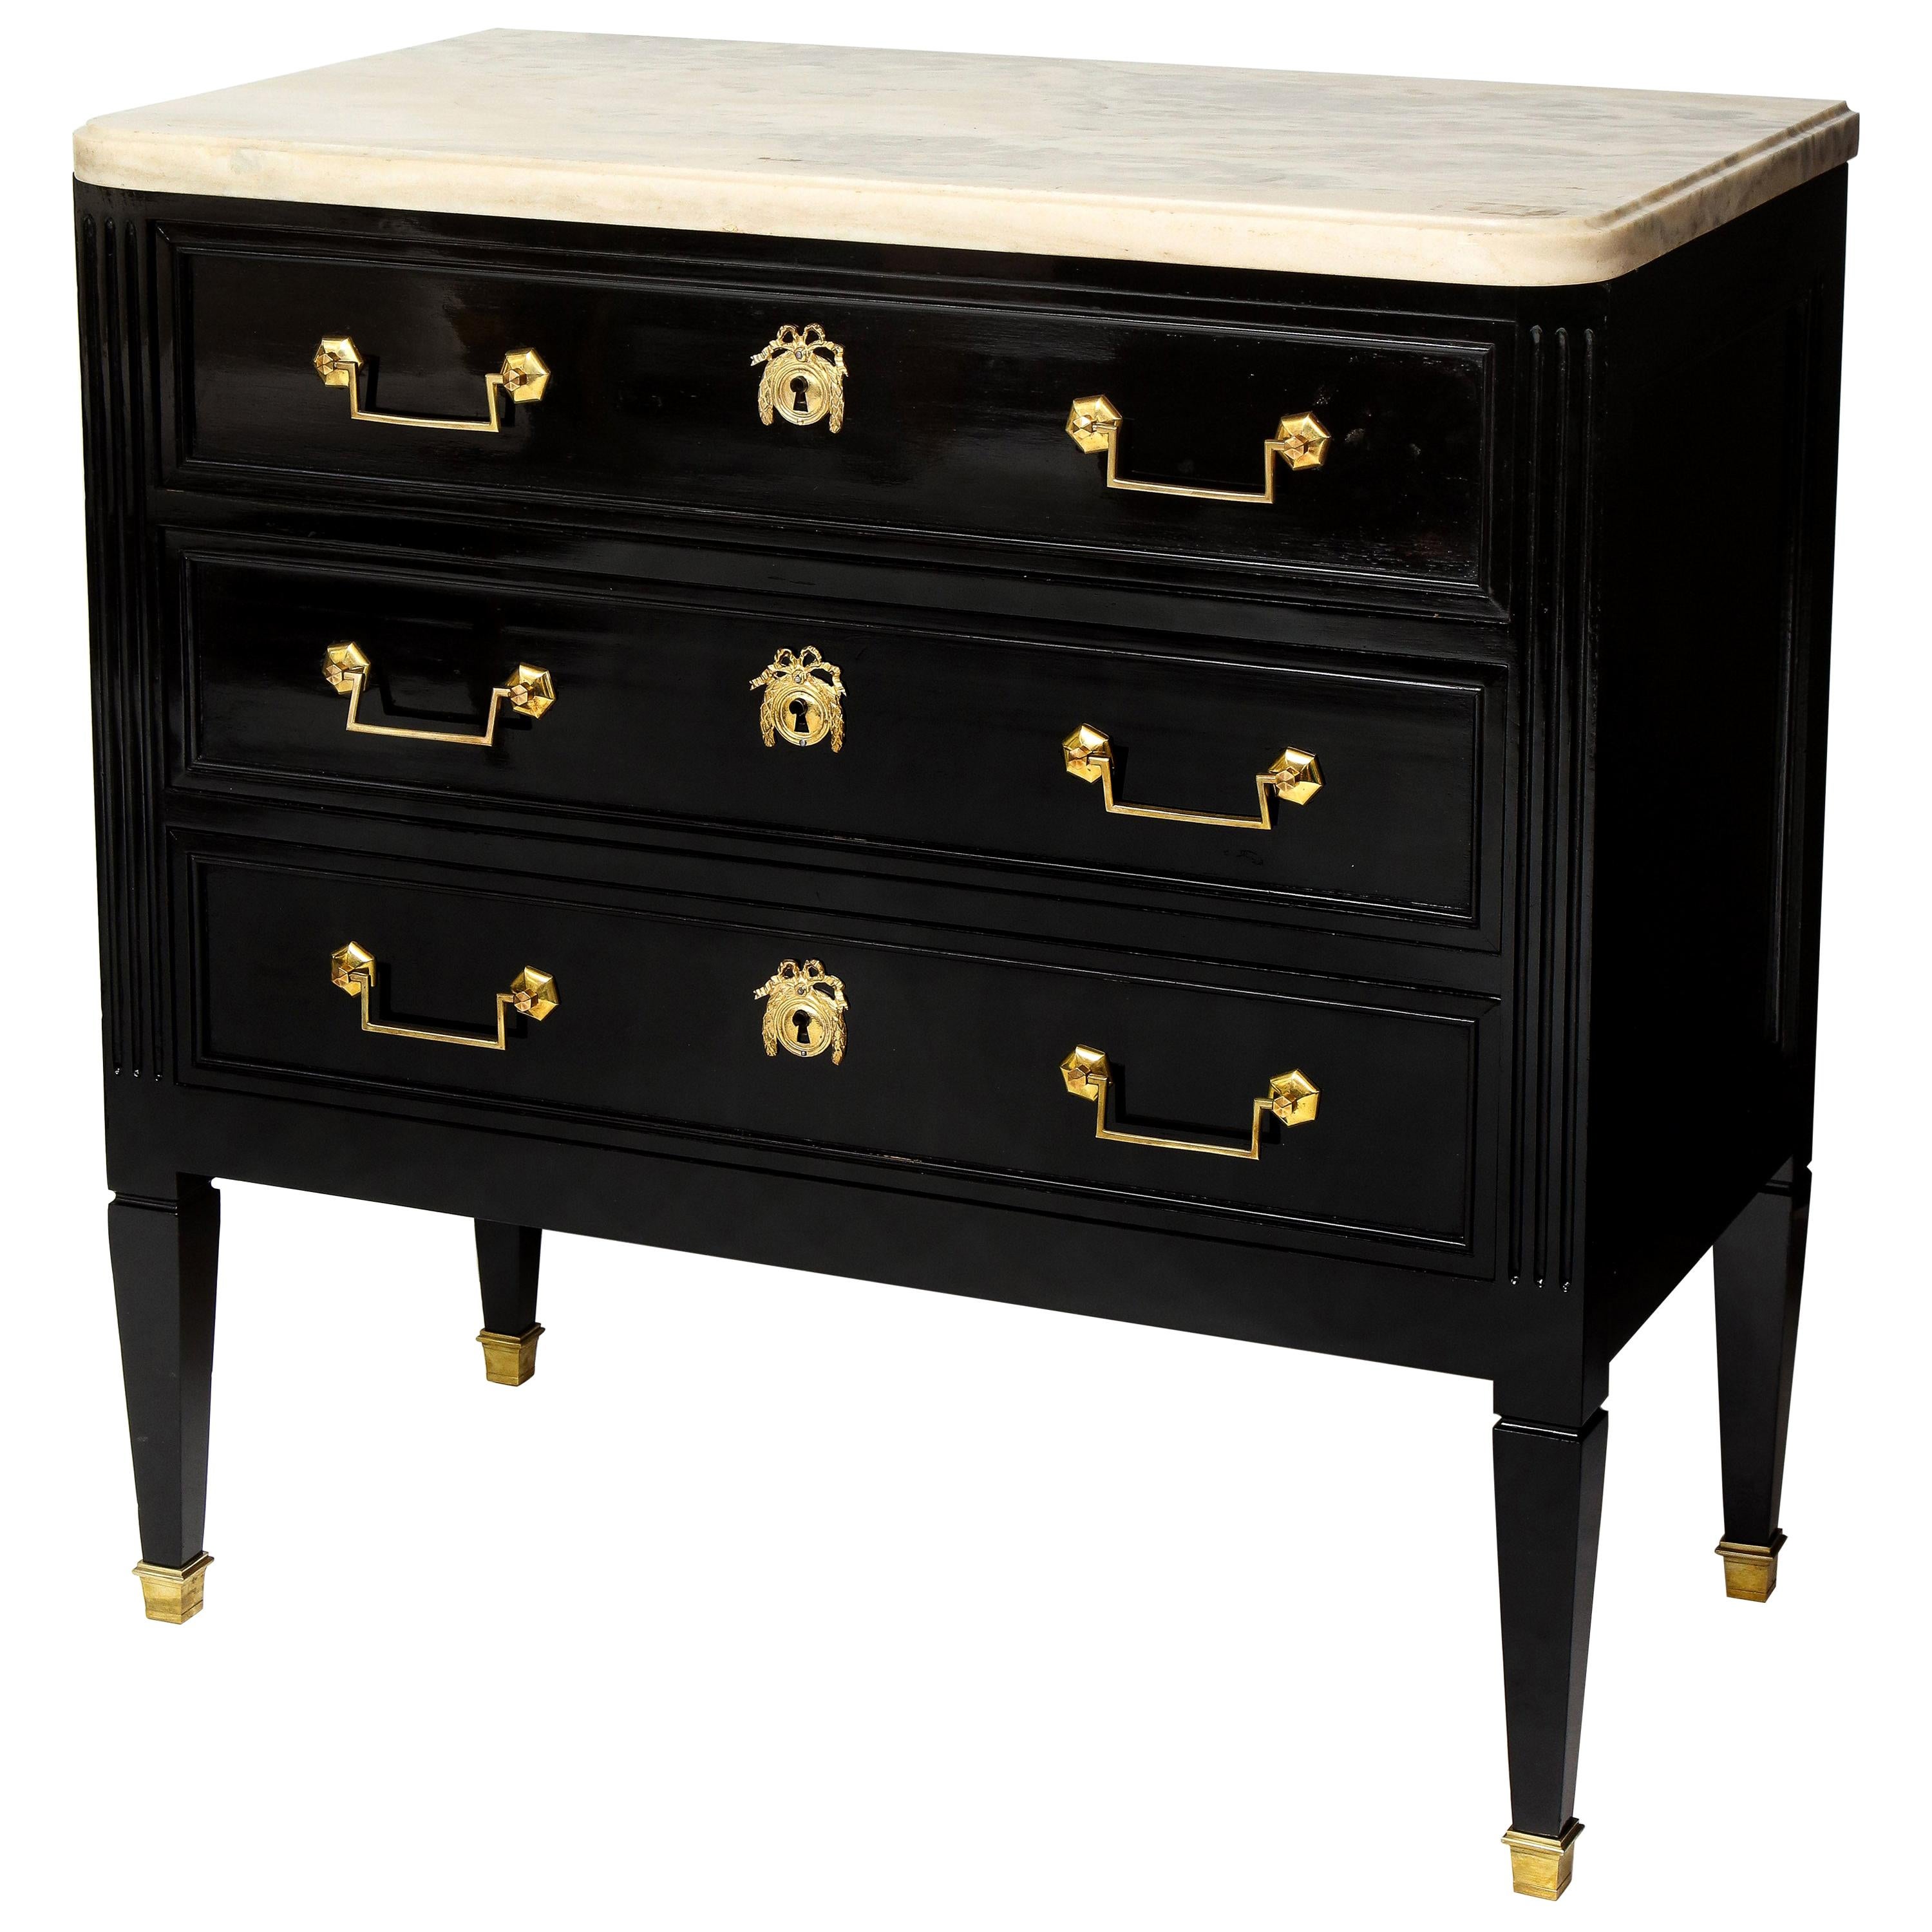 Vintage French Ebonized Marble-Top Commode in the Directoire Manner For Sale